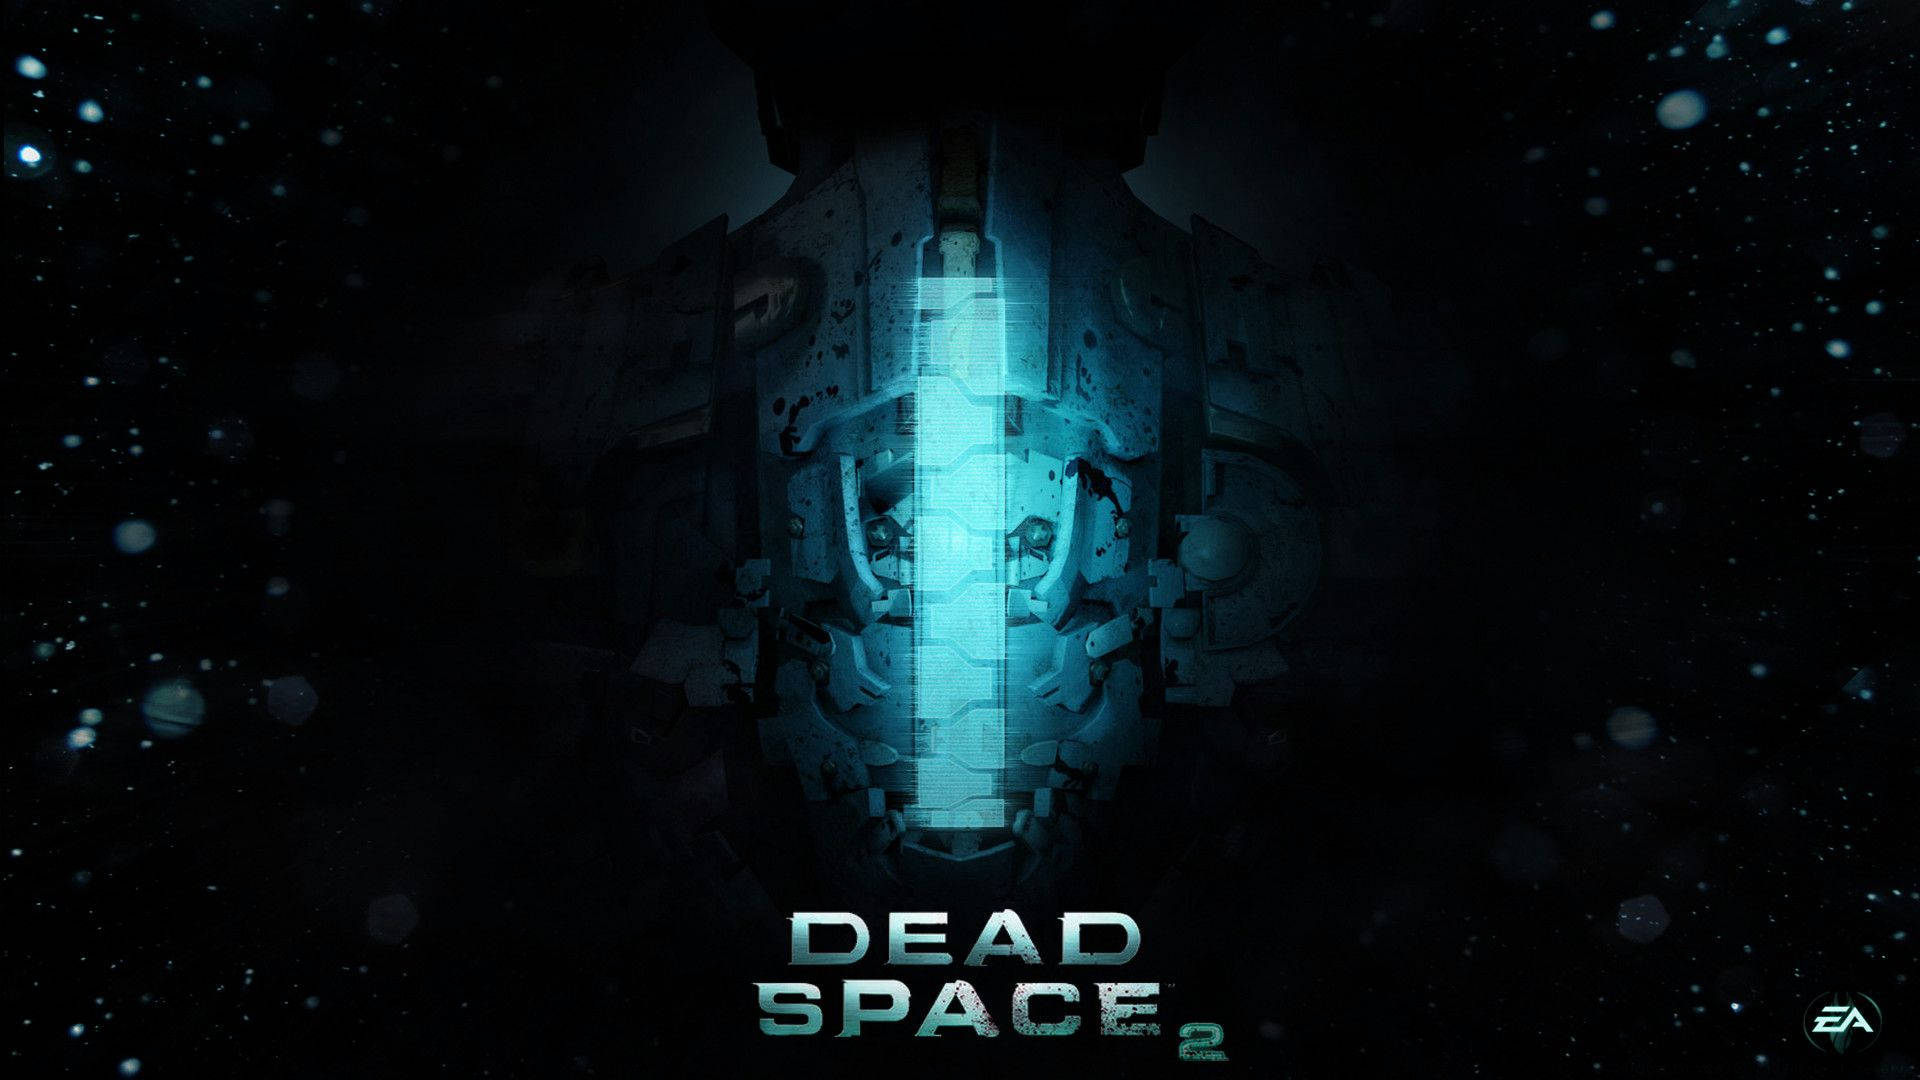 Top 999+ Dead Space Wallpaper Full HD, 4K Free to Use